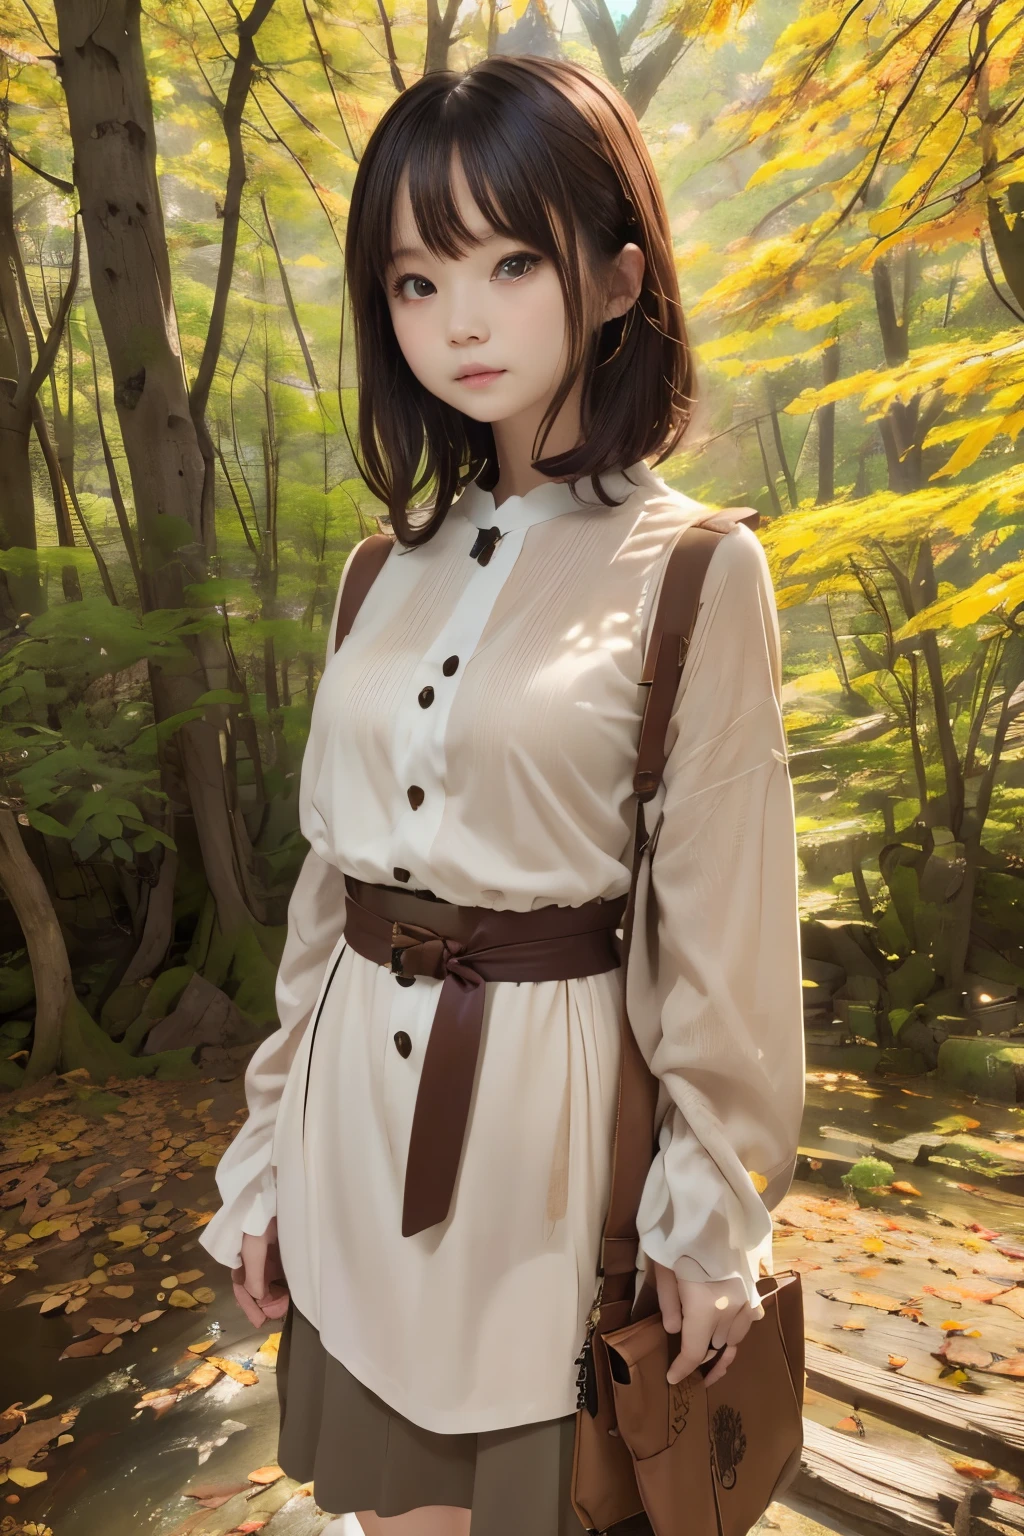 masuter piece、solo、Little woman、Short Bob、Natural color clothing、Natural look、top-quality、Ultra-detail、High quality detailing、８ｋ、Colored leaves:1.5、deep autumn forest、Tree leakage day、Silence